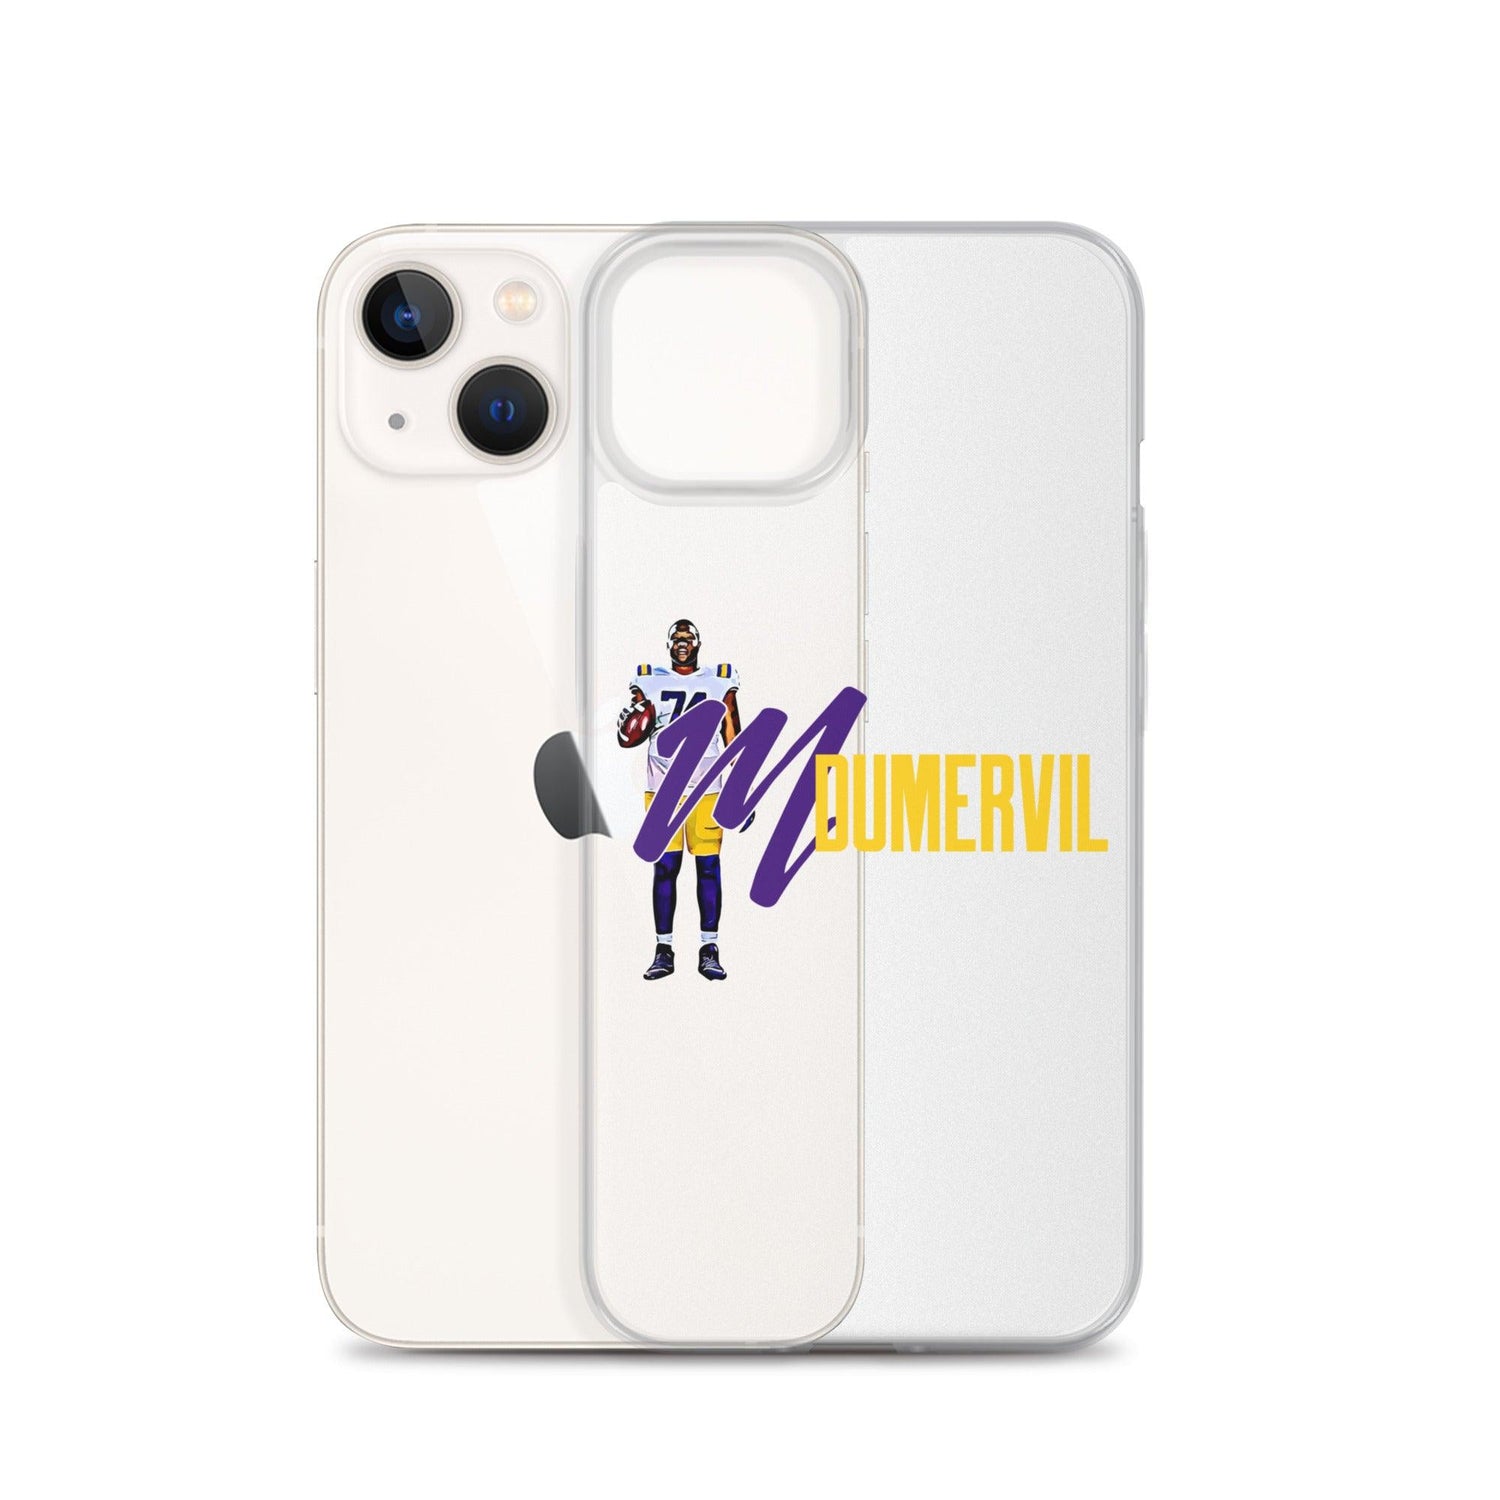 Marcus Dumervil "Stand Strong" iPhone Case - Fan Arch